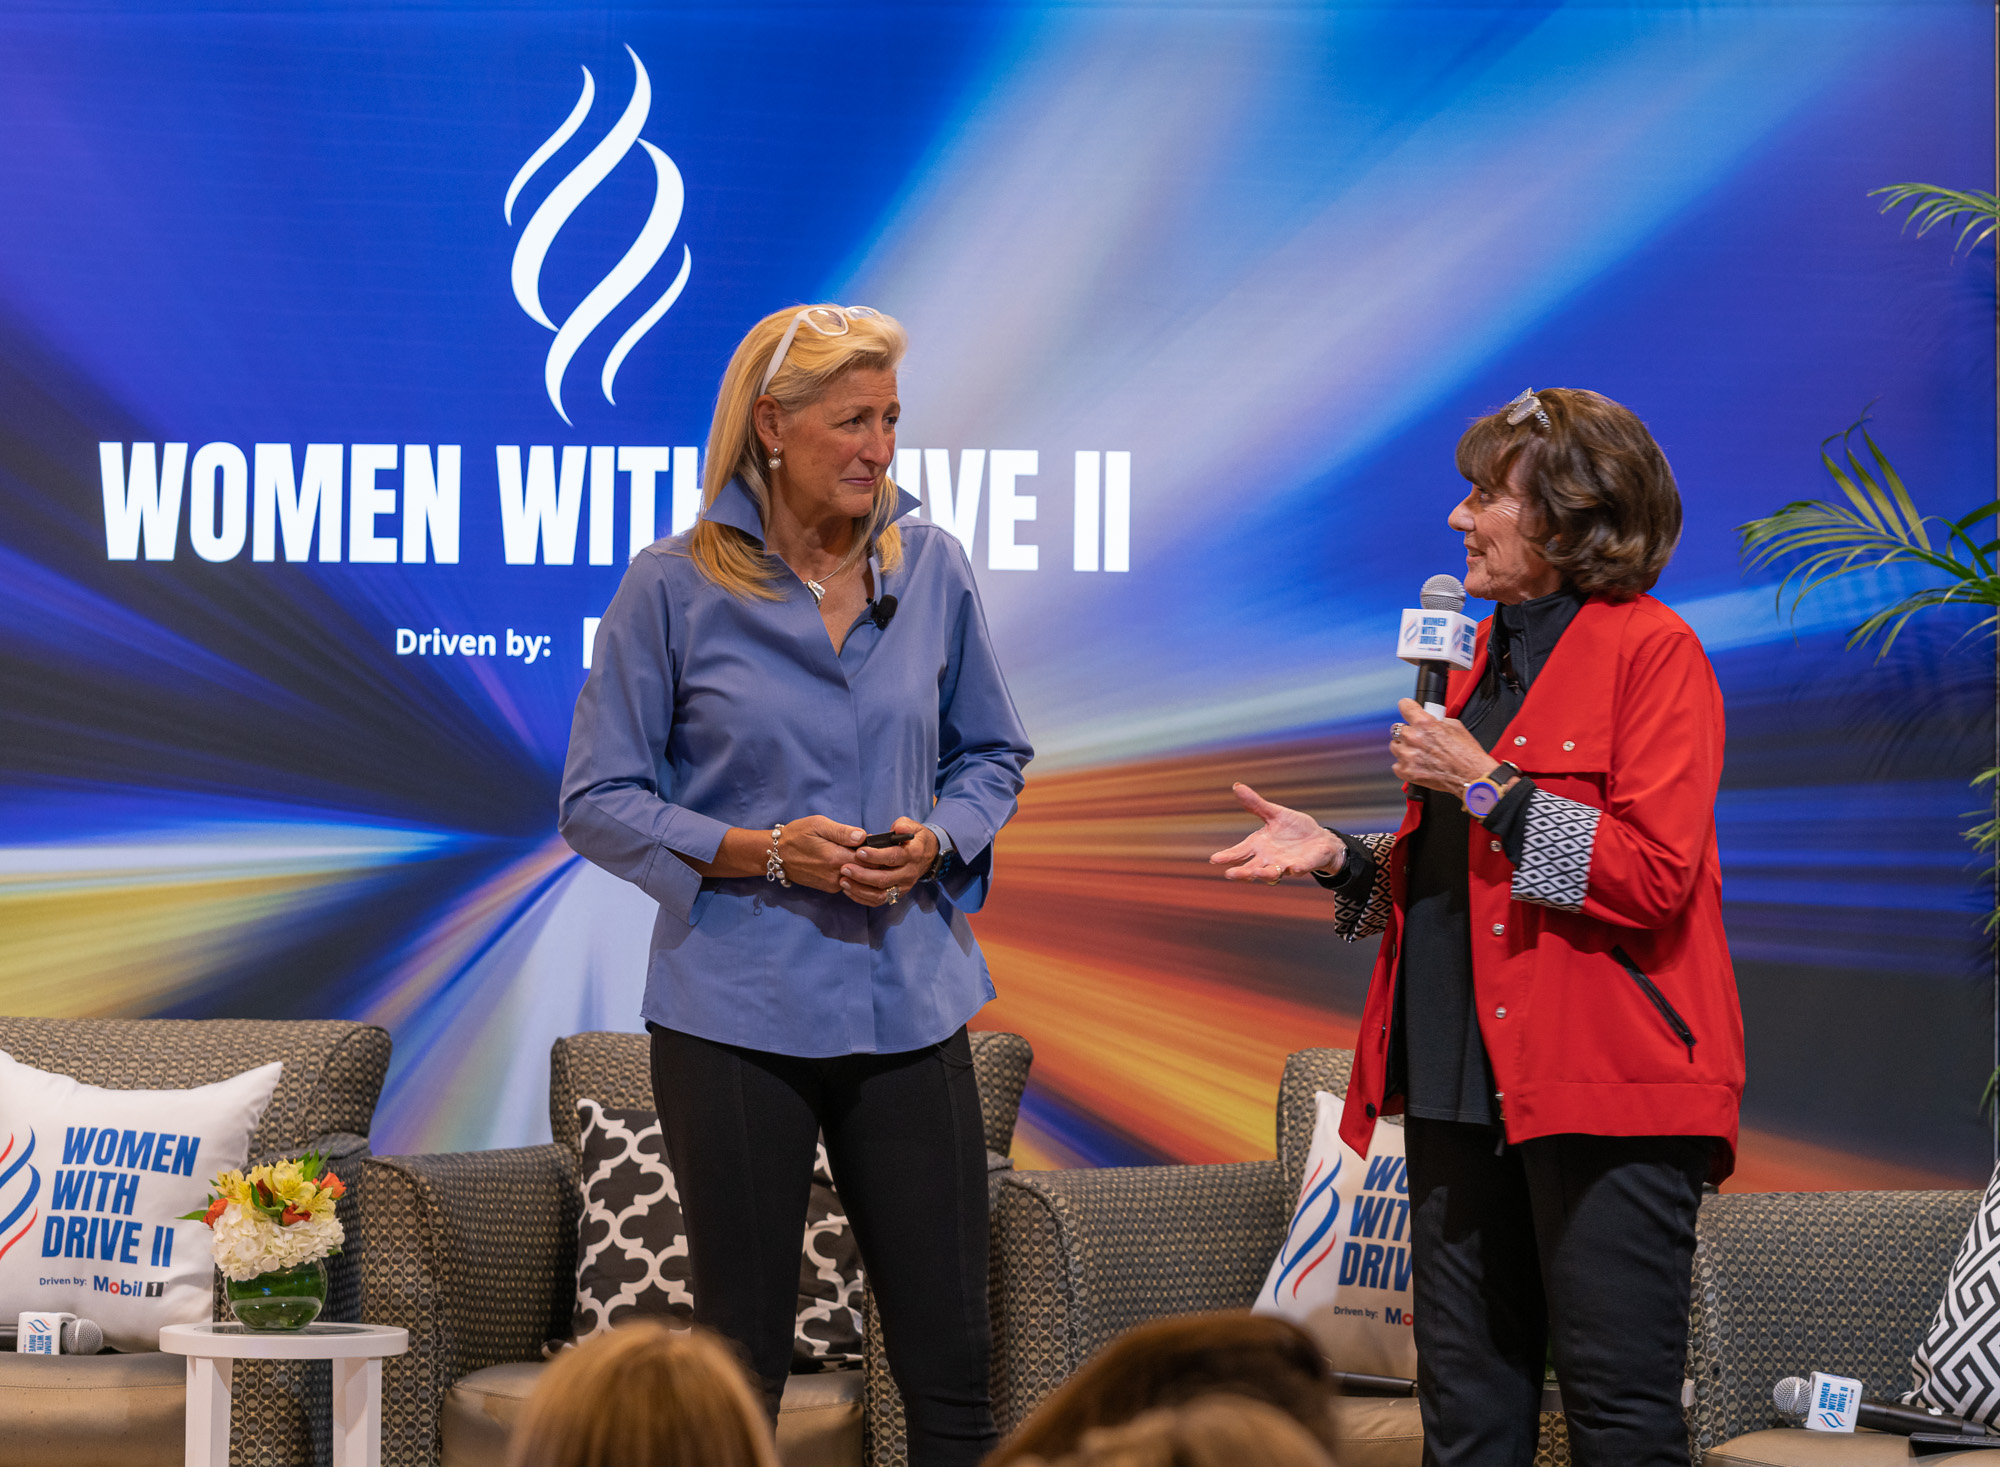 Linda Lindquist-Bishop with Lyn St. James at Women with Drive II, Oct, 2022